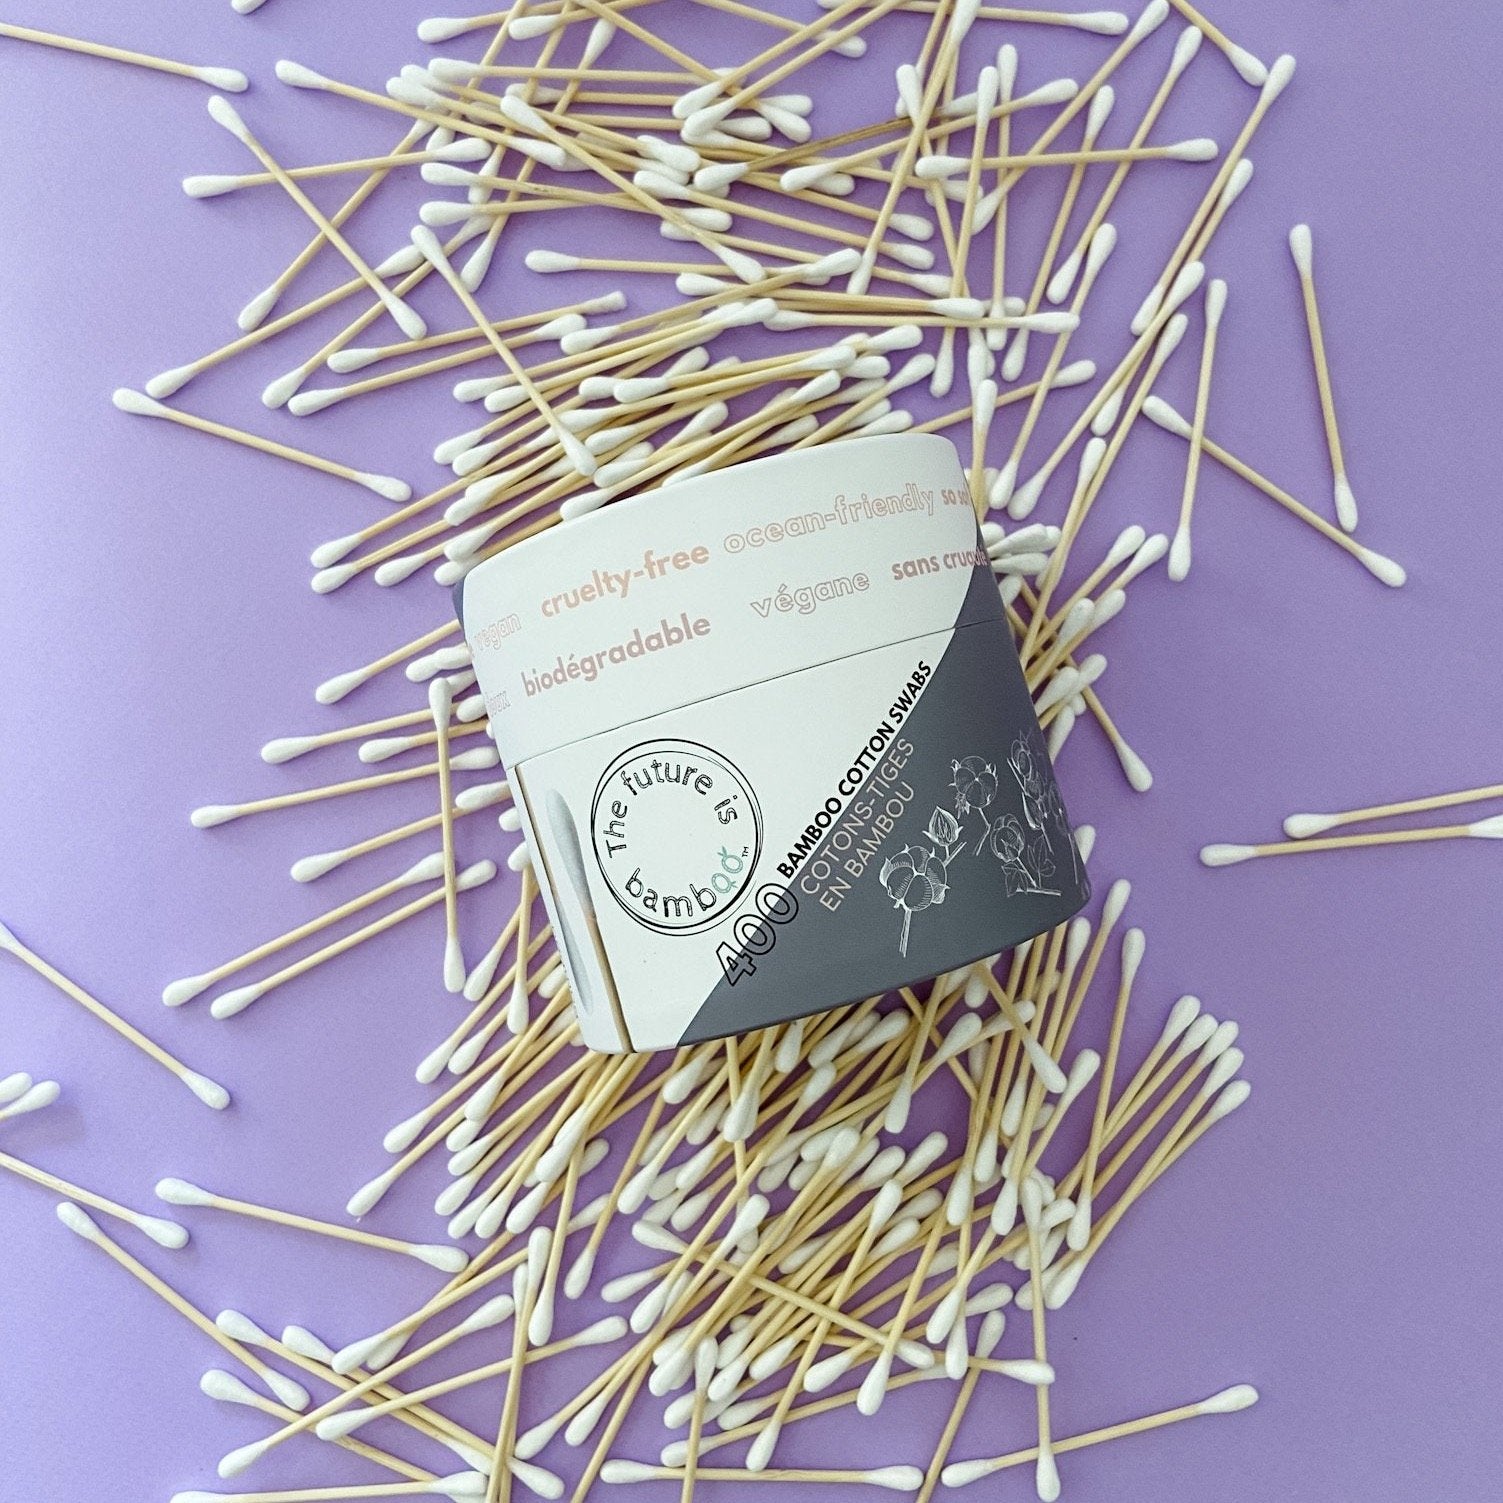 NEW! Biodegradable Cotton Swabs - 400 count - The Future is Bamboo 